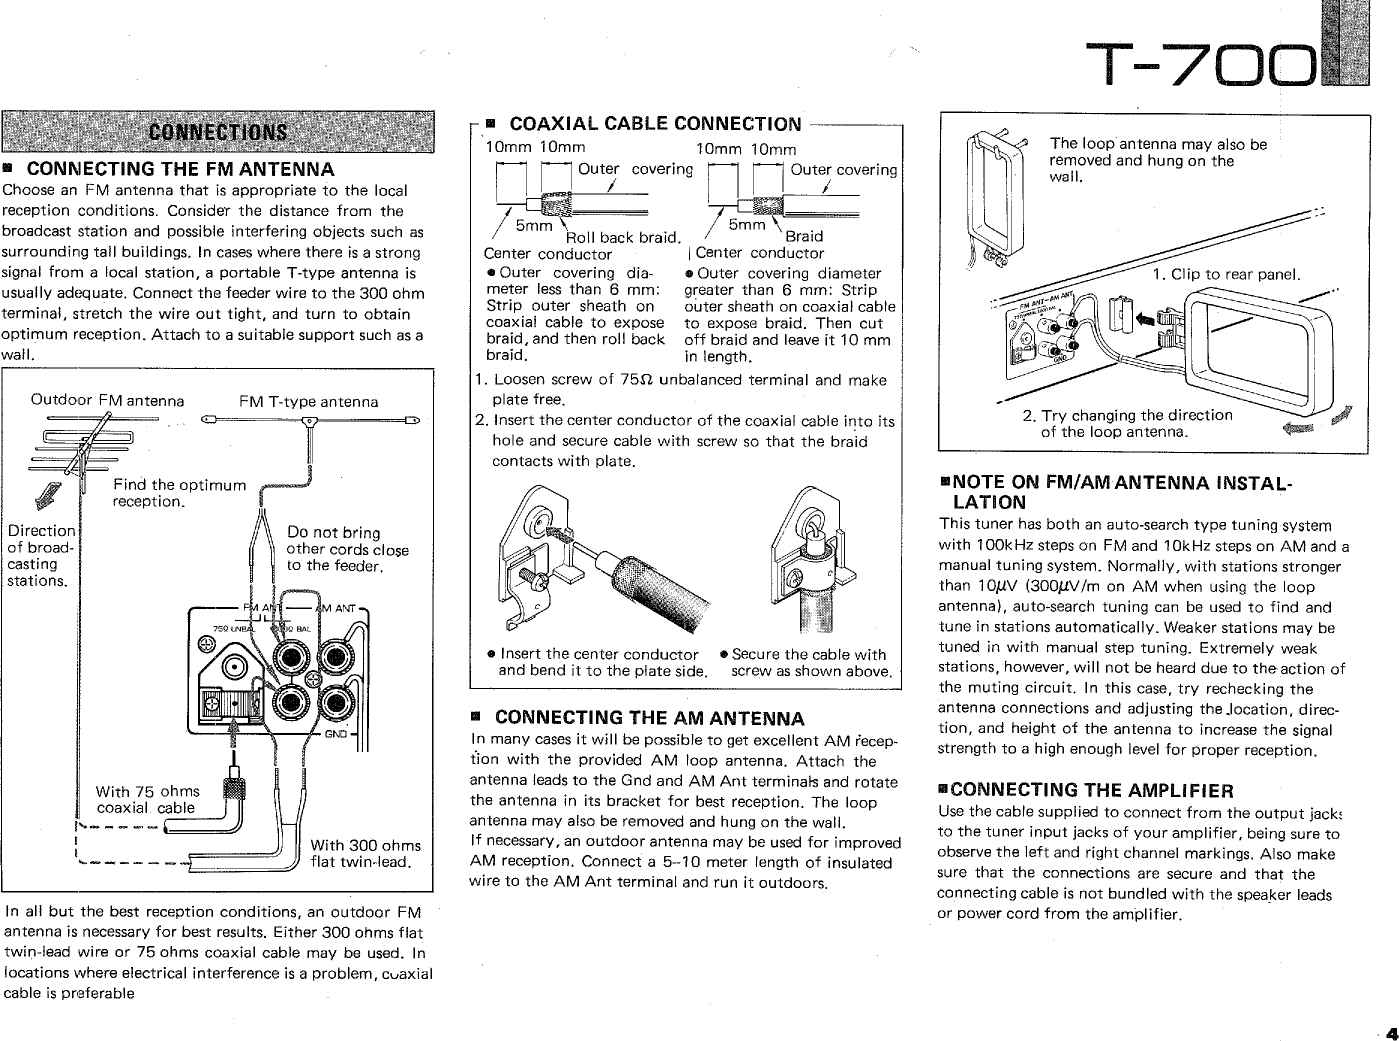 Page 5 of 12 - Yamaha .橡.ページ) T-700 OWNER'S MANUAL